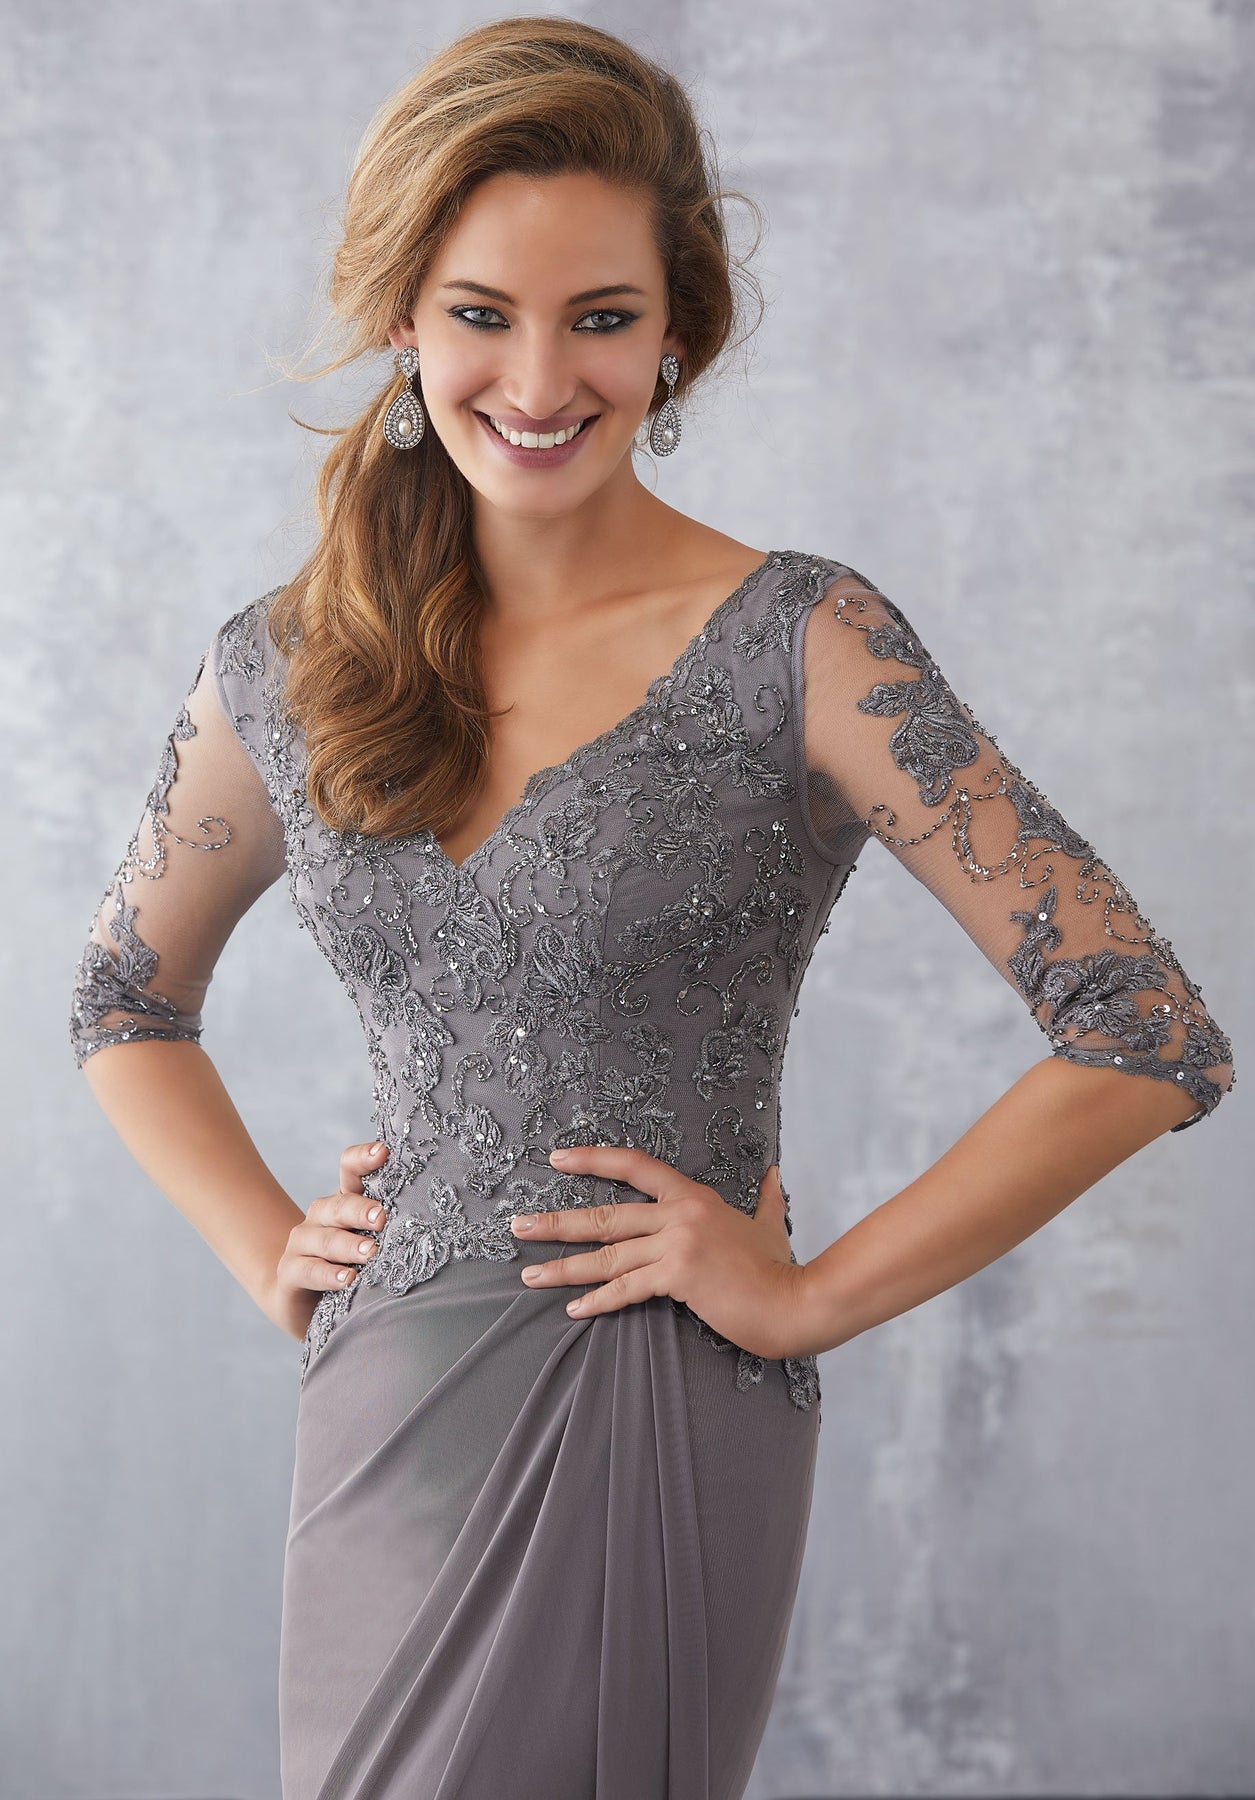 MGNY By Mori Lee - 71728 Embroidered Plunging V-neck Sheath Dress In Gray